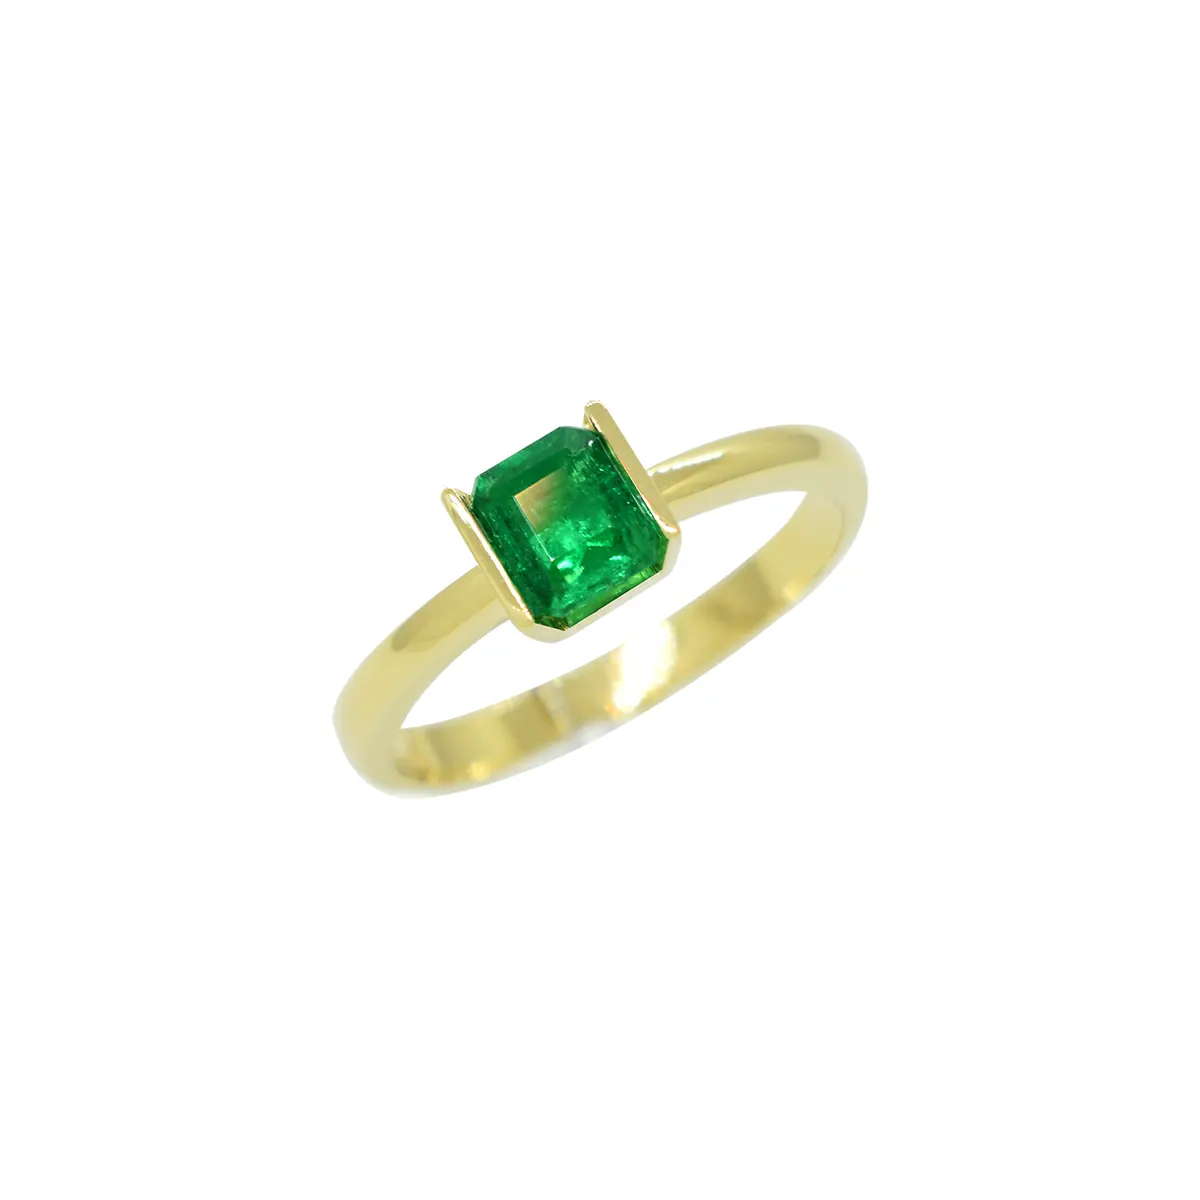 emerald-cut-emerald-solitaire-ring-in-18k-yellow-gold-tension-setting-